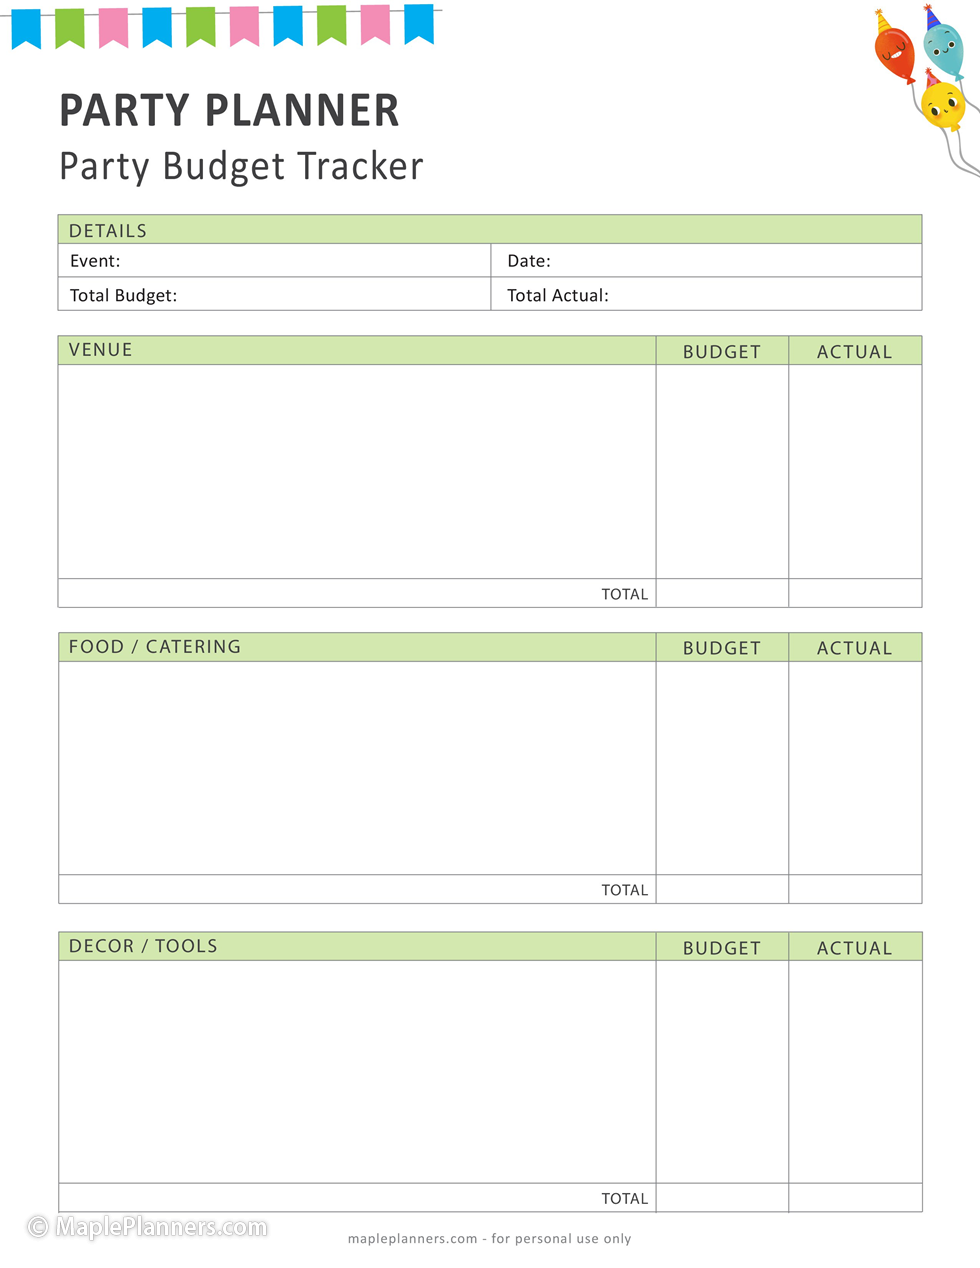 Party Budget Tracker Template